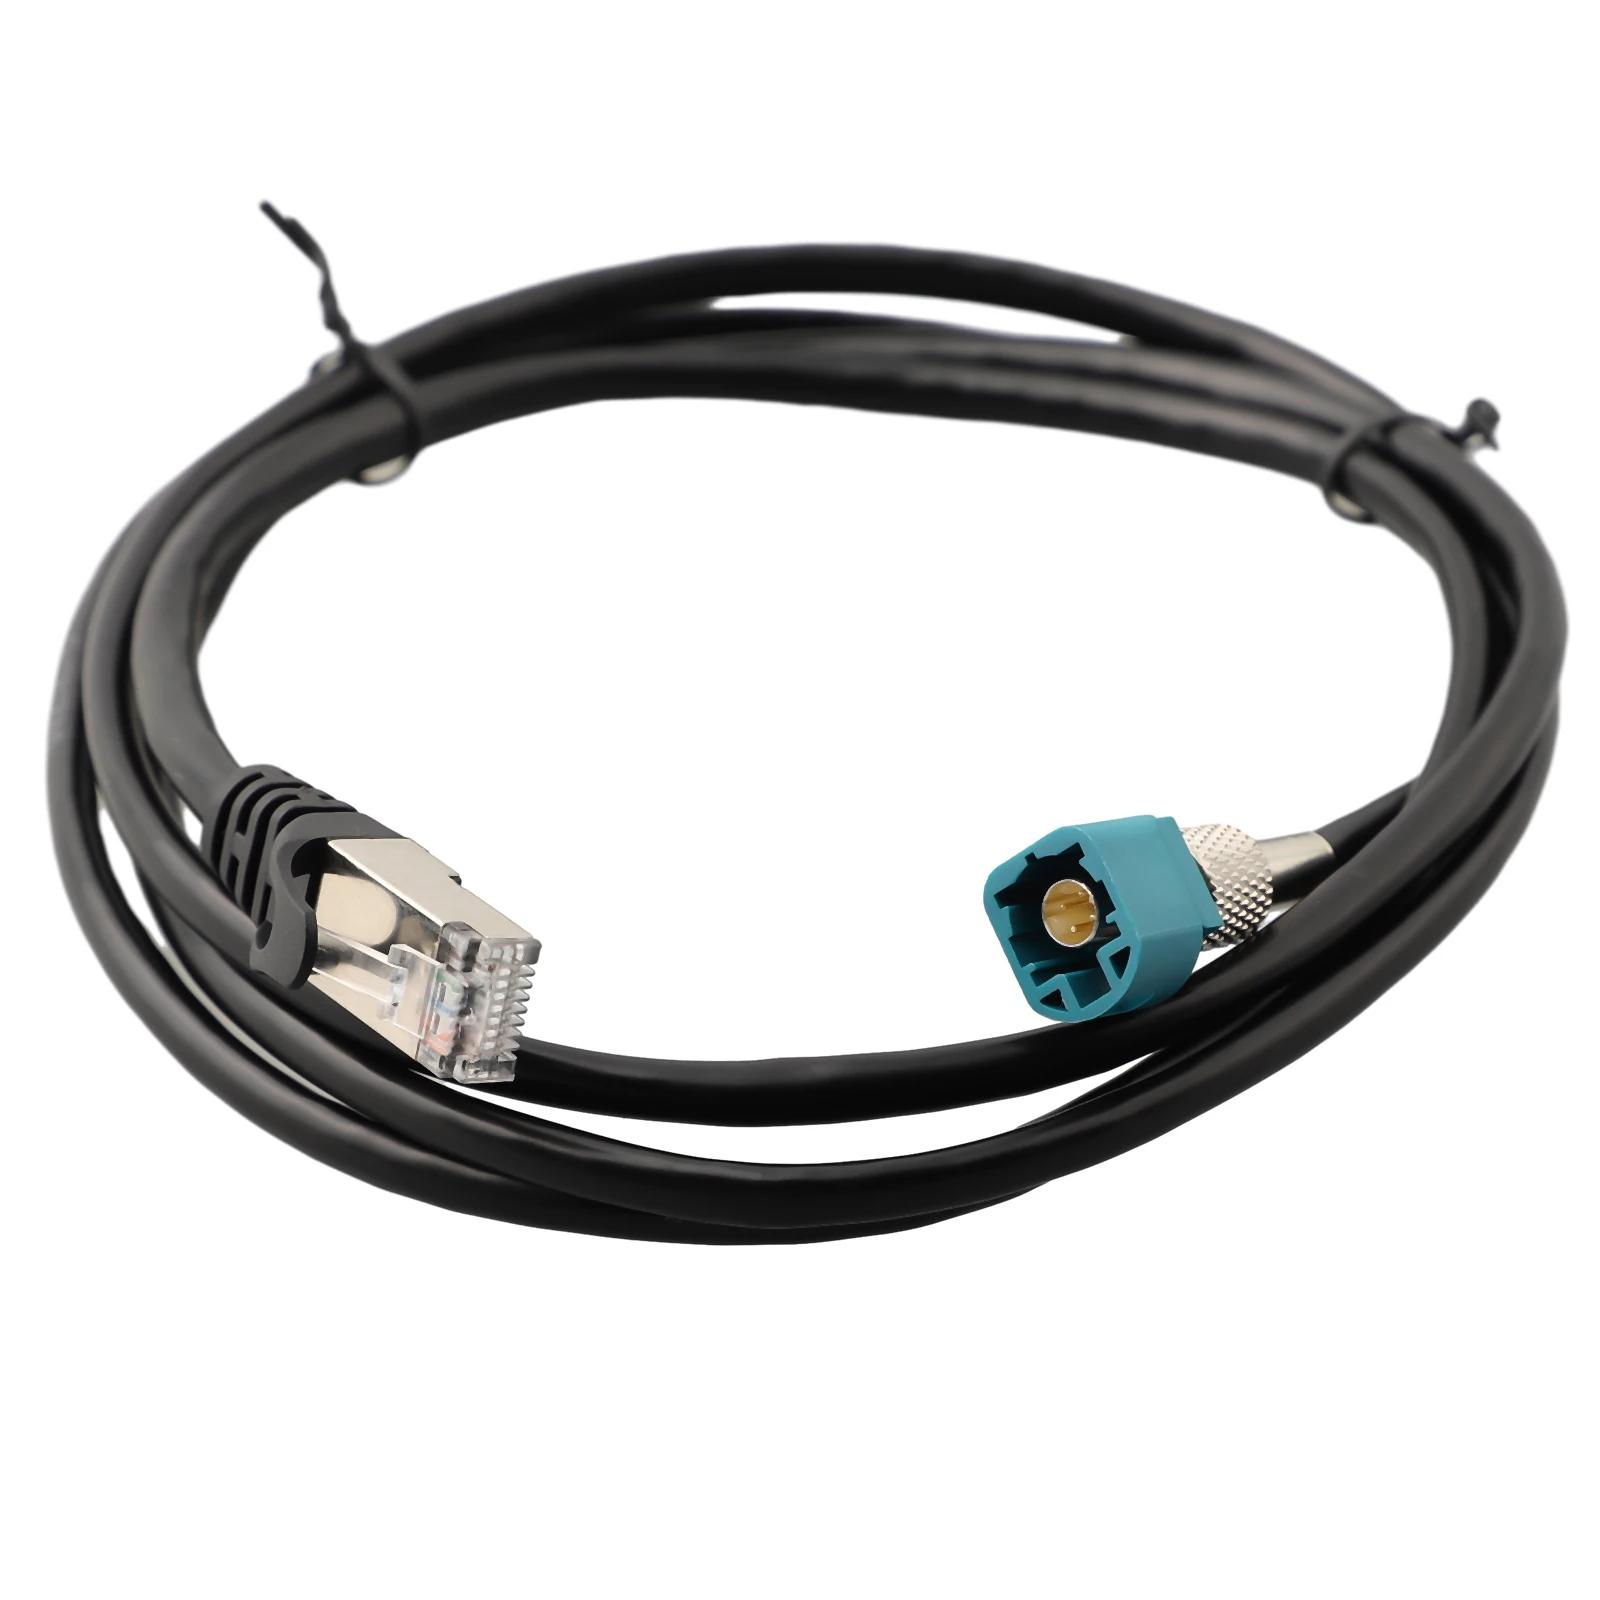 

Reliable Diagnostic Service Cable for Tesla Model S/X 12 16 Plug and Play Design for Hassle Free Installation